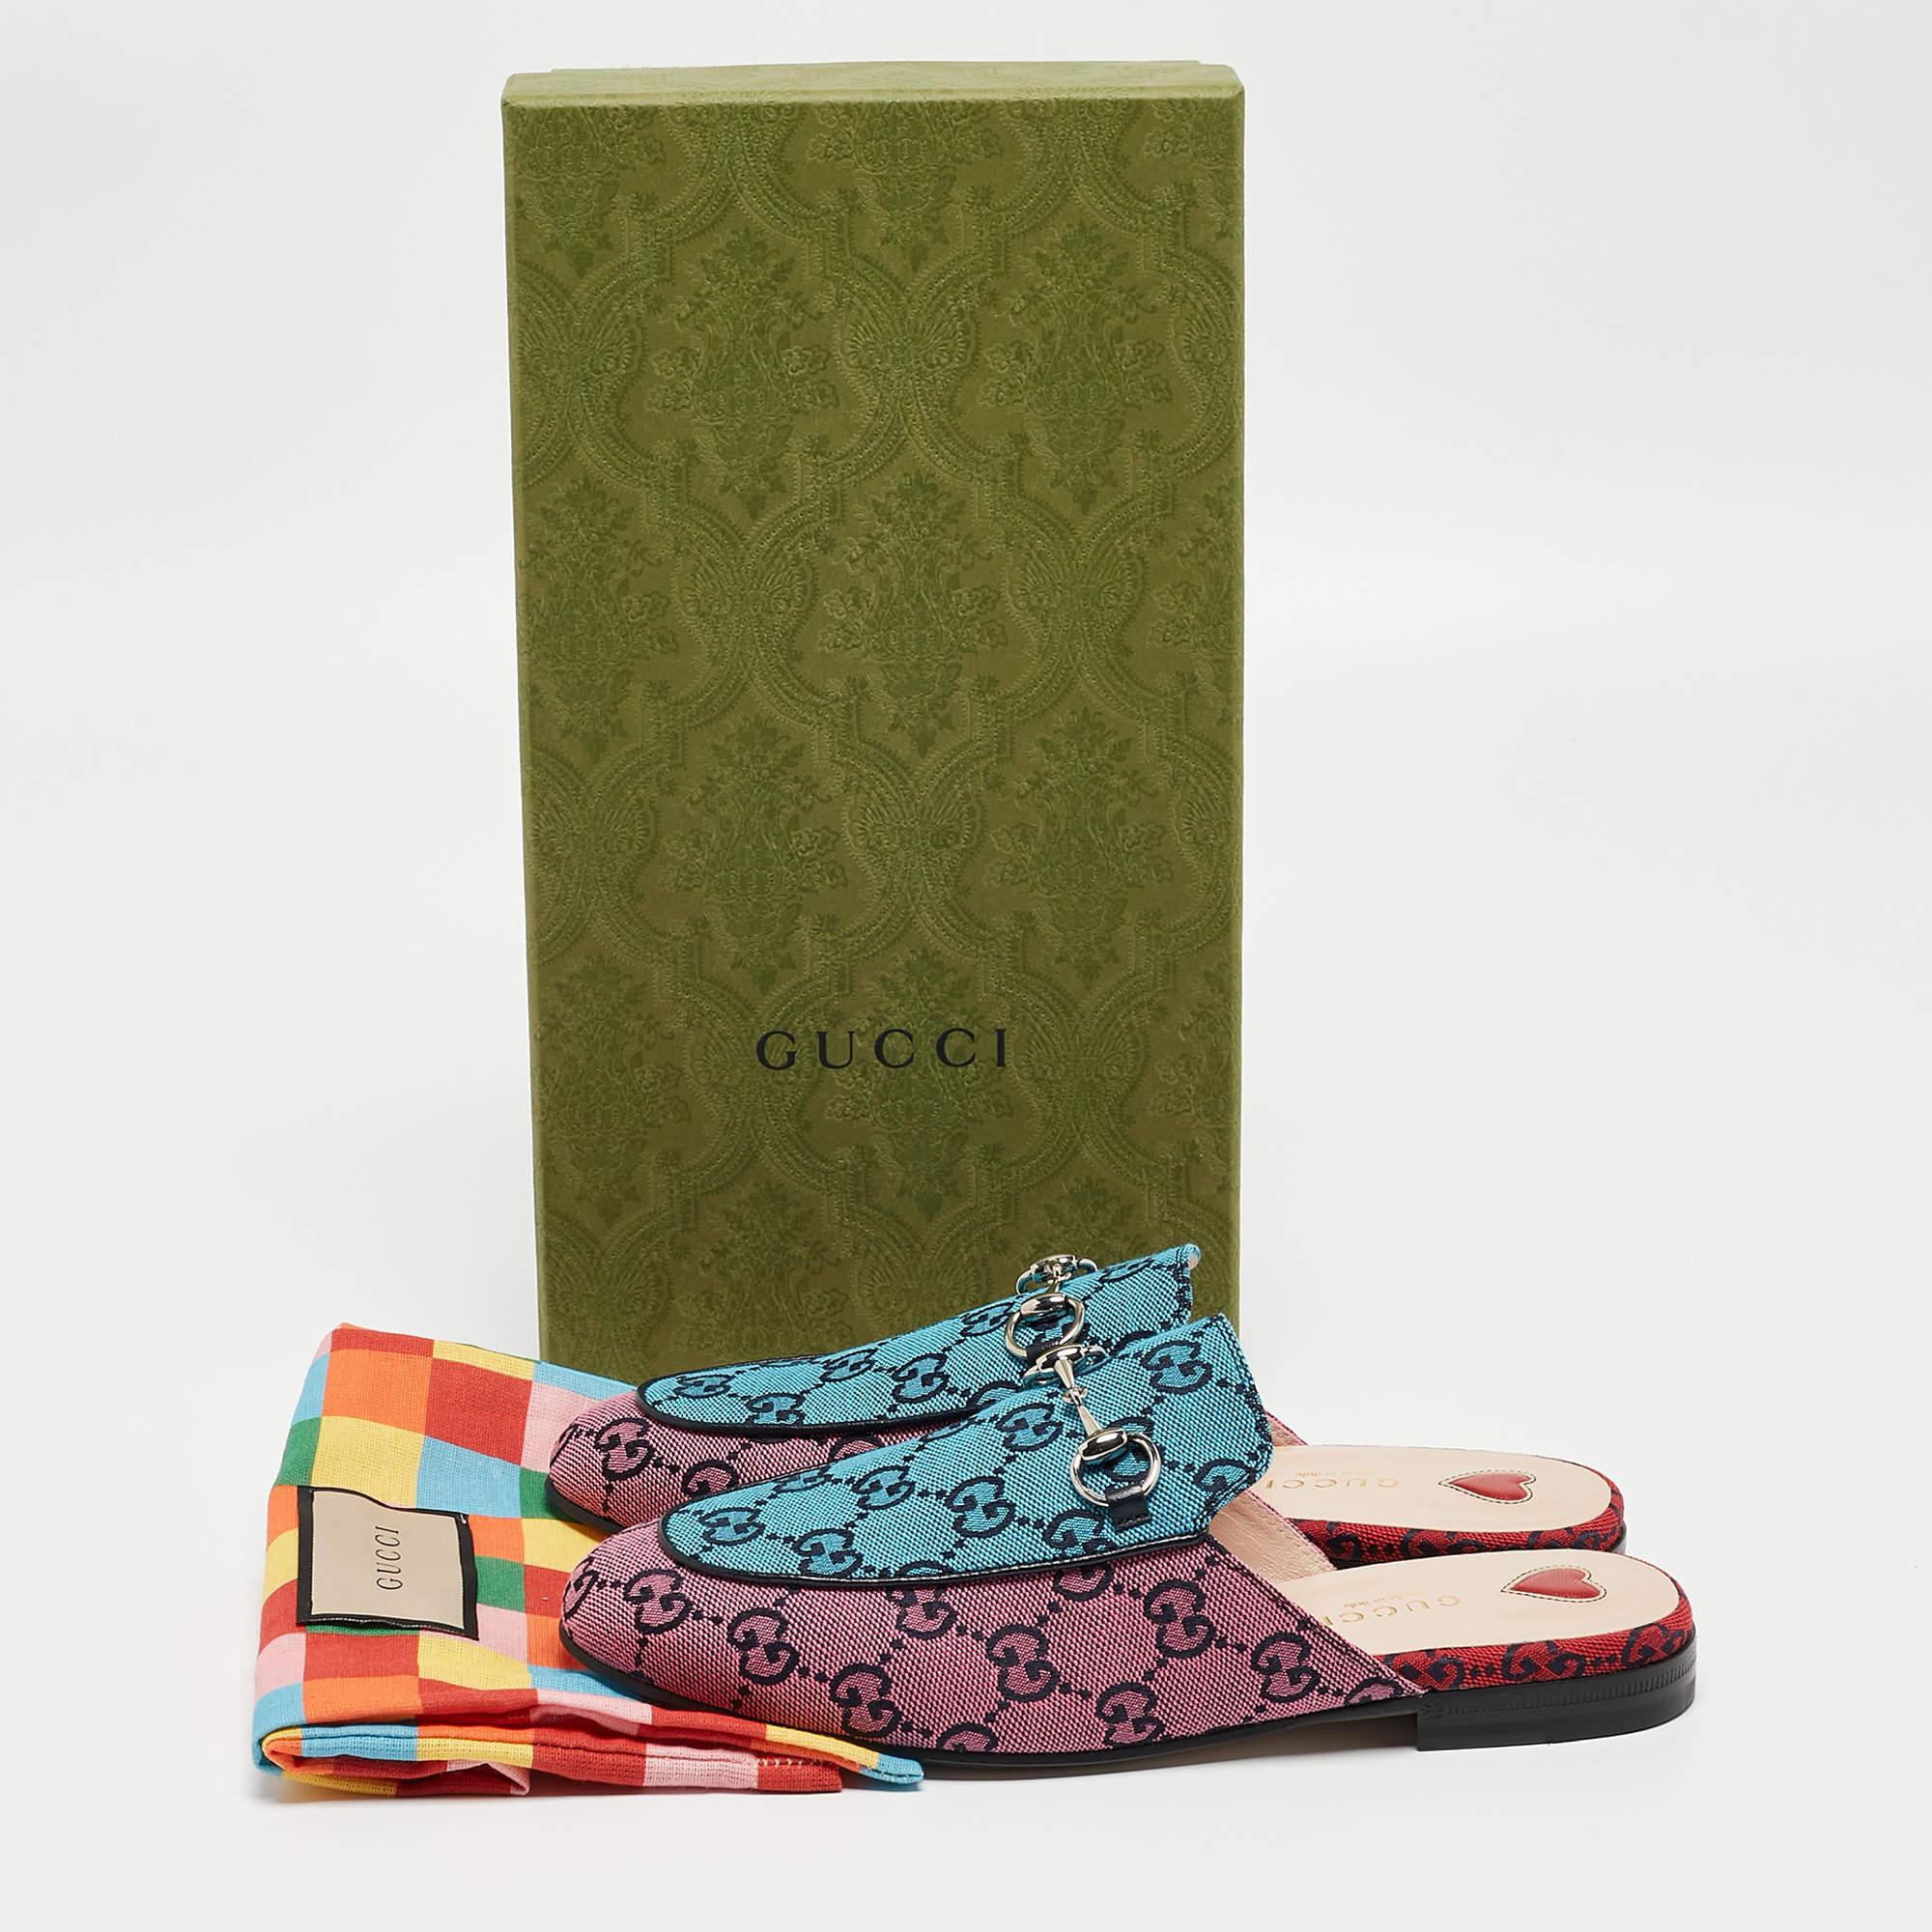 These Gucci Princetown mules are a fresh update on the perennially chic Gucci horsebit loafers. These shoes are enhanced by a gold-tone horsebit detail that has defined the Gucci collection since the very beginning. Featuring a GG canvas body and